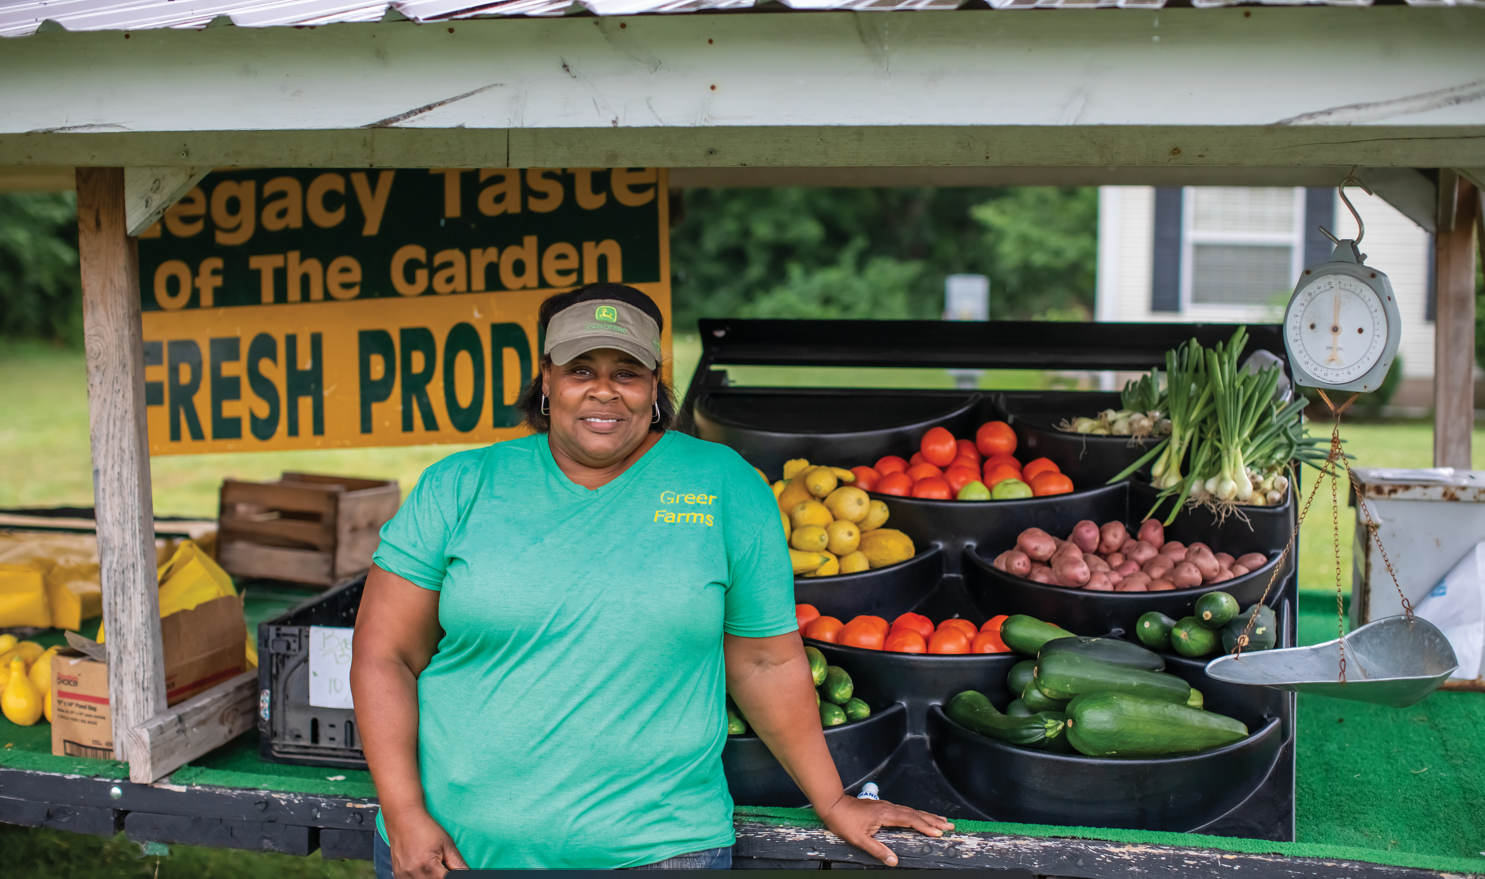 A woman in front of a produce stand